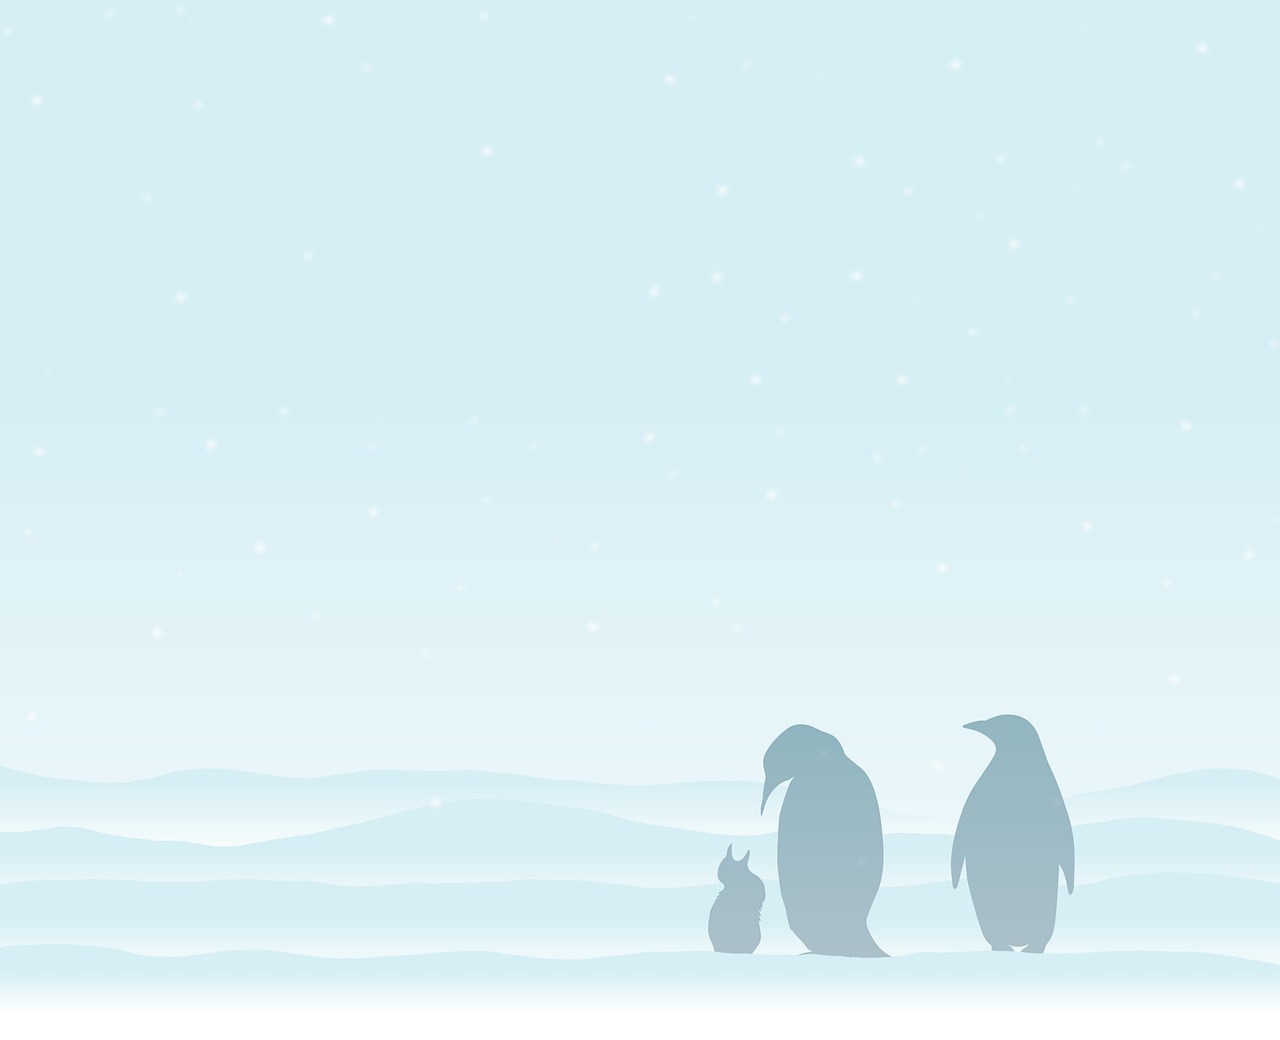 a couple of penguins standing next to each other, an illustration of, inspired by Jean-Léon Gérôme, minimalism, background soft blue, card template, snow scene, family photo